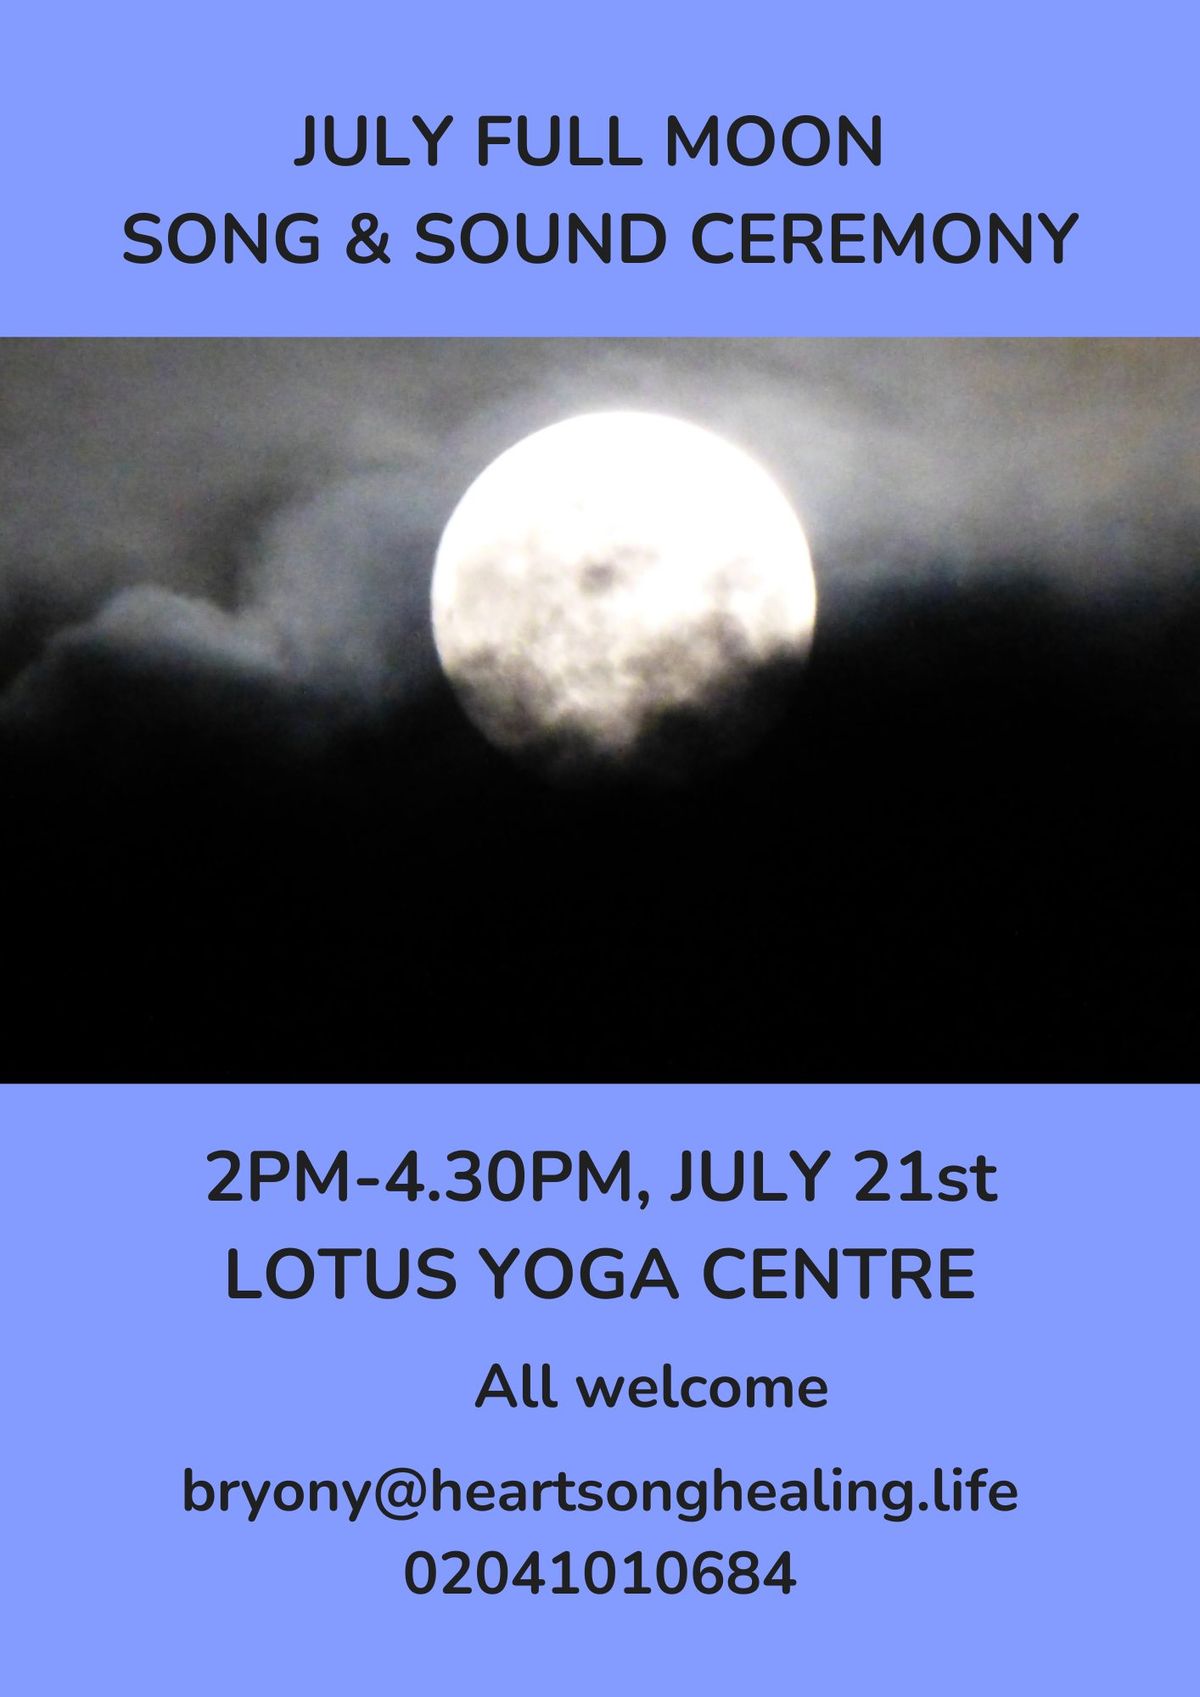 JULY FULL MOON SONG AND SOUND CEREMONY